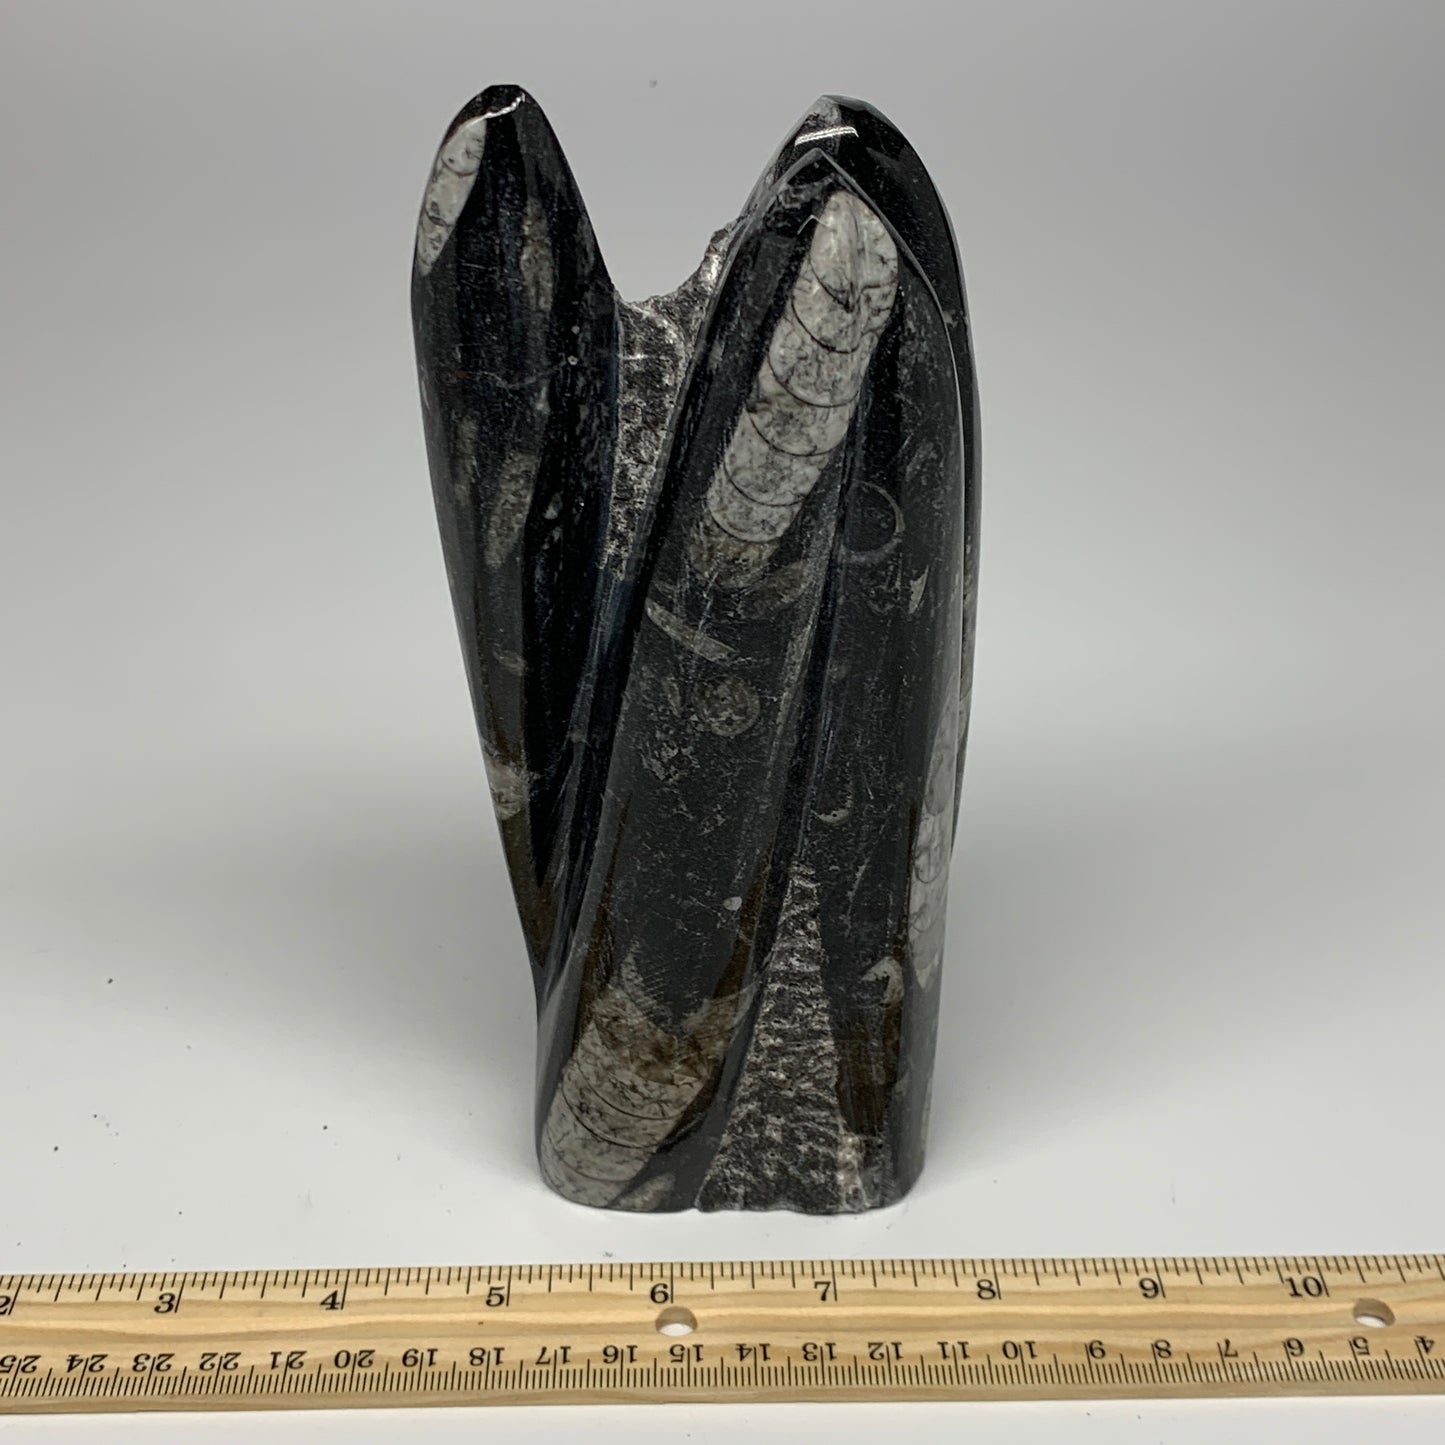 1240g, 7.2"x3.4"x2.4" Black Fossils Orthoceras Sculpture Tower @Morocco, B23445